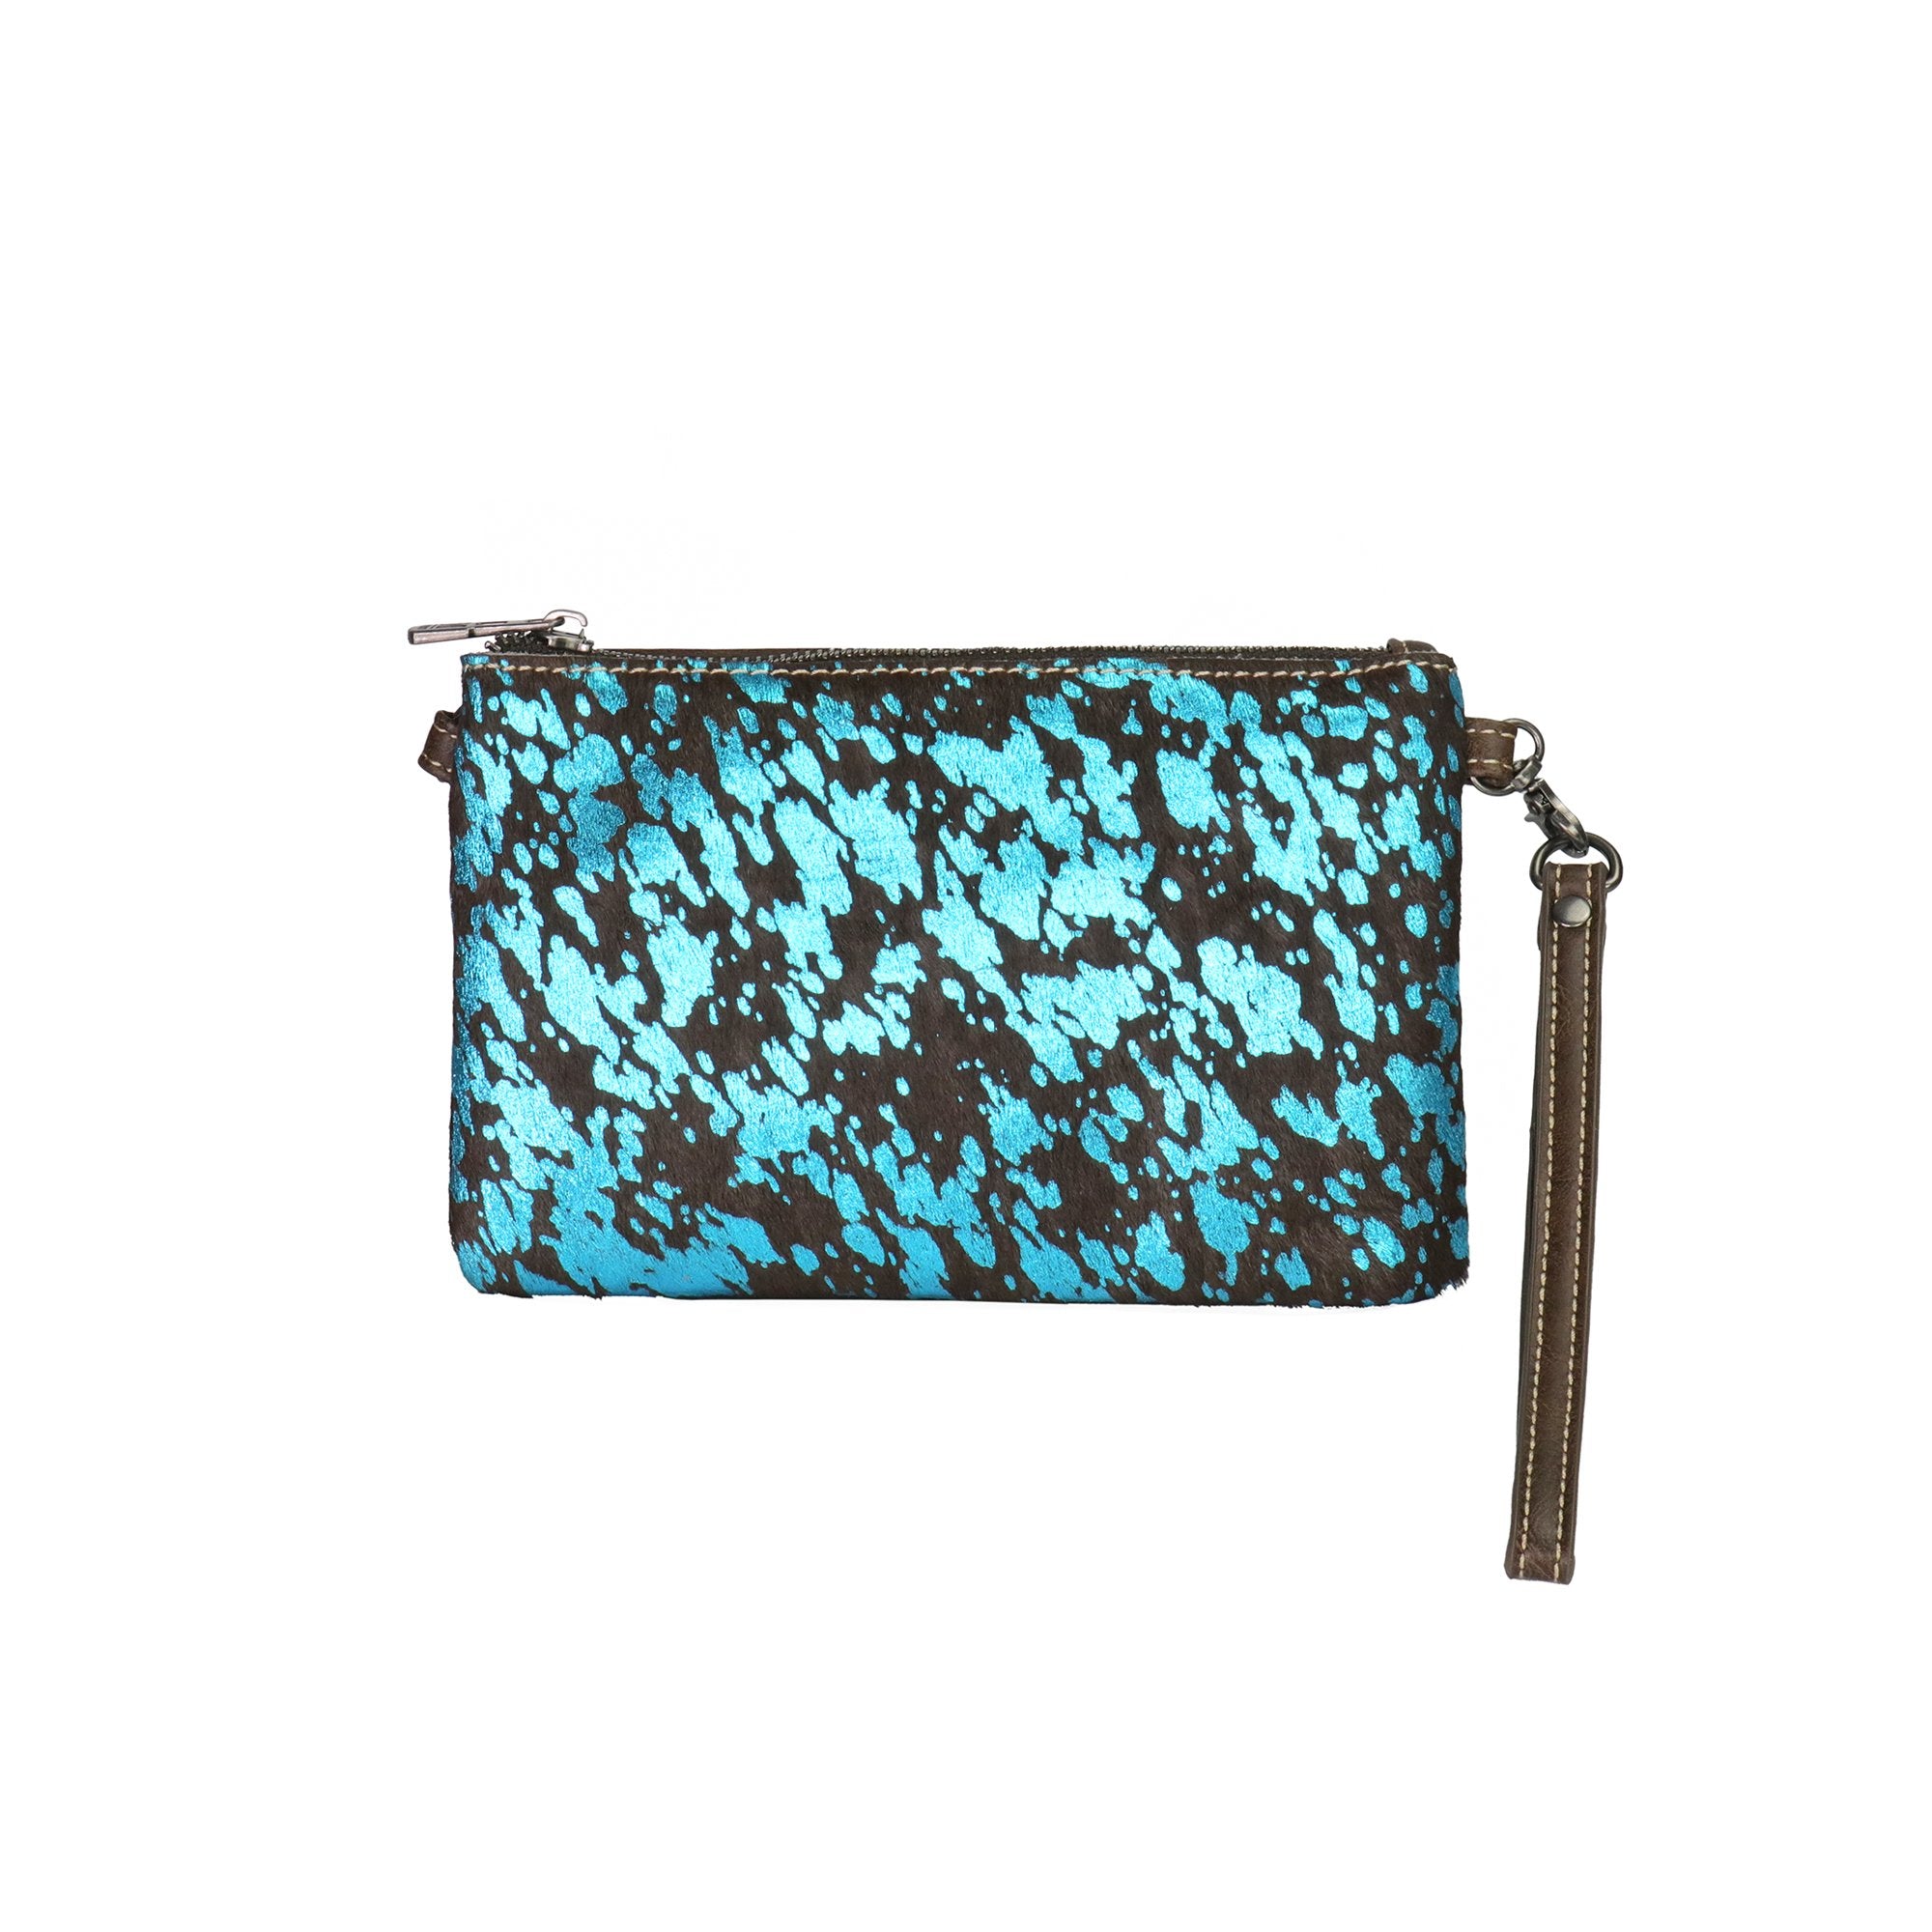 Montana West Hair-On Cowhide Leather Clutch